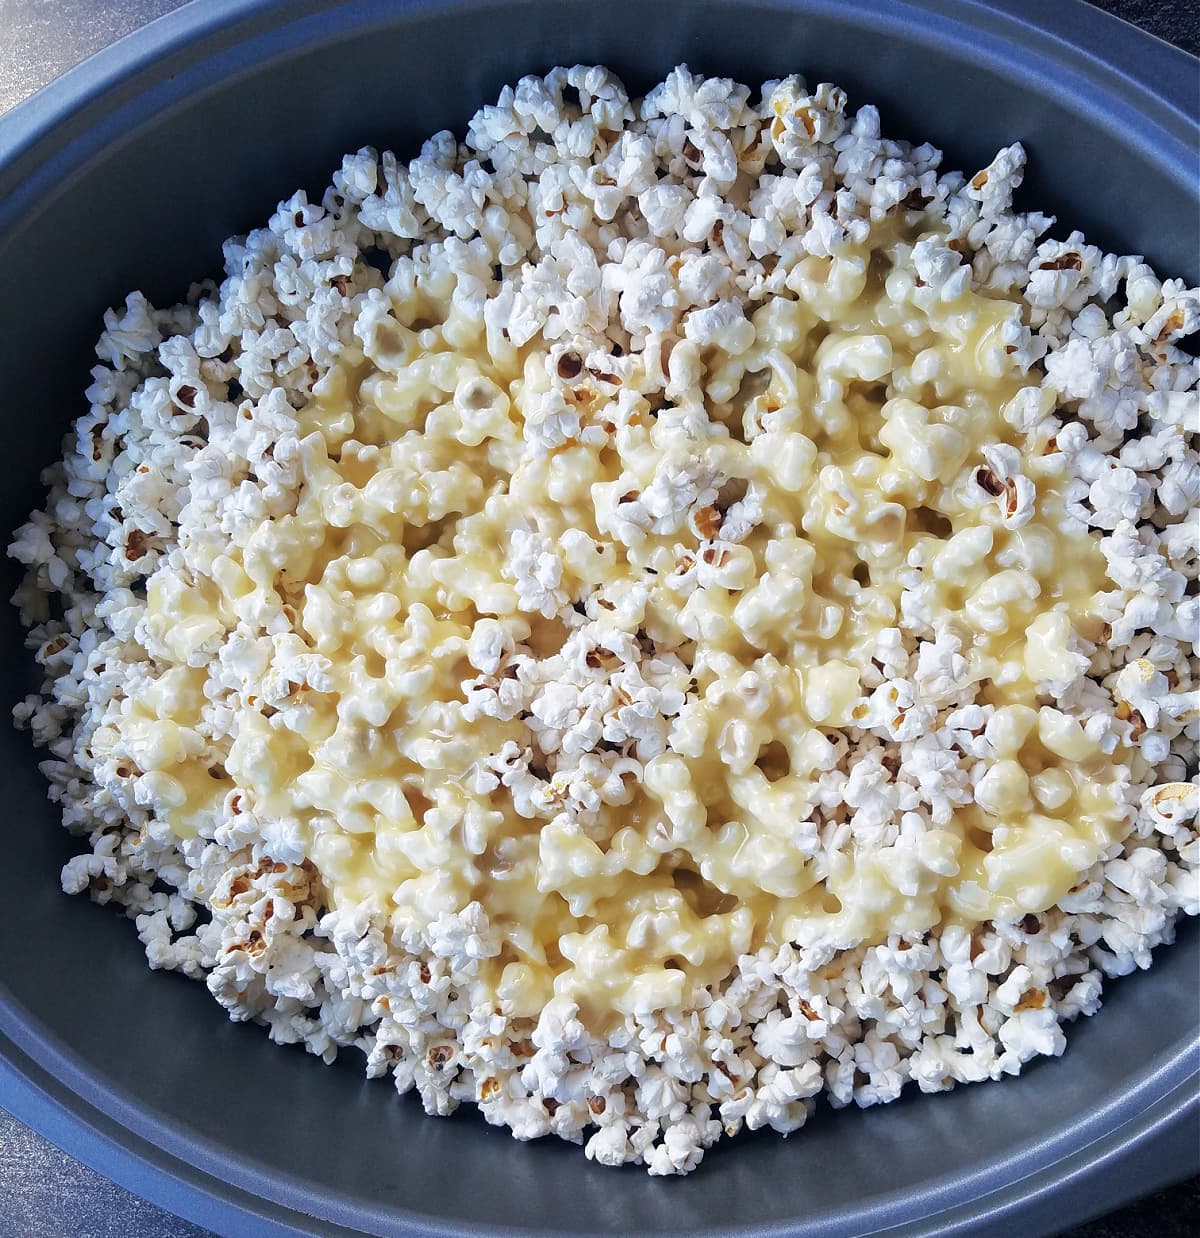 Butter and sugar mixture poured over popcorn in large roasting pan. 